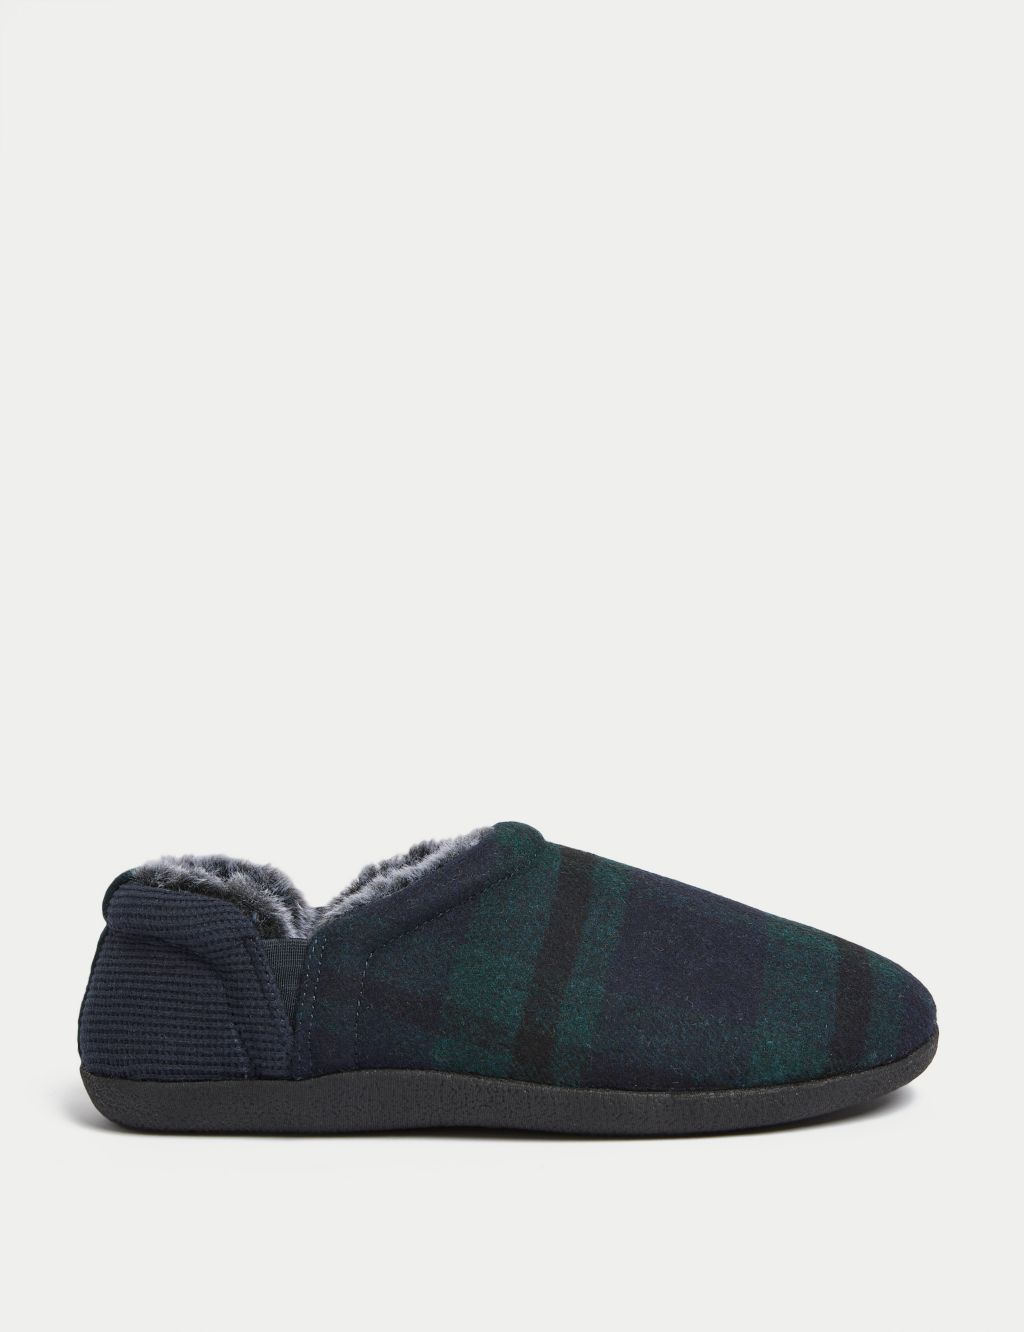 Checked Mule Slippers